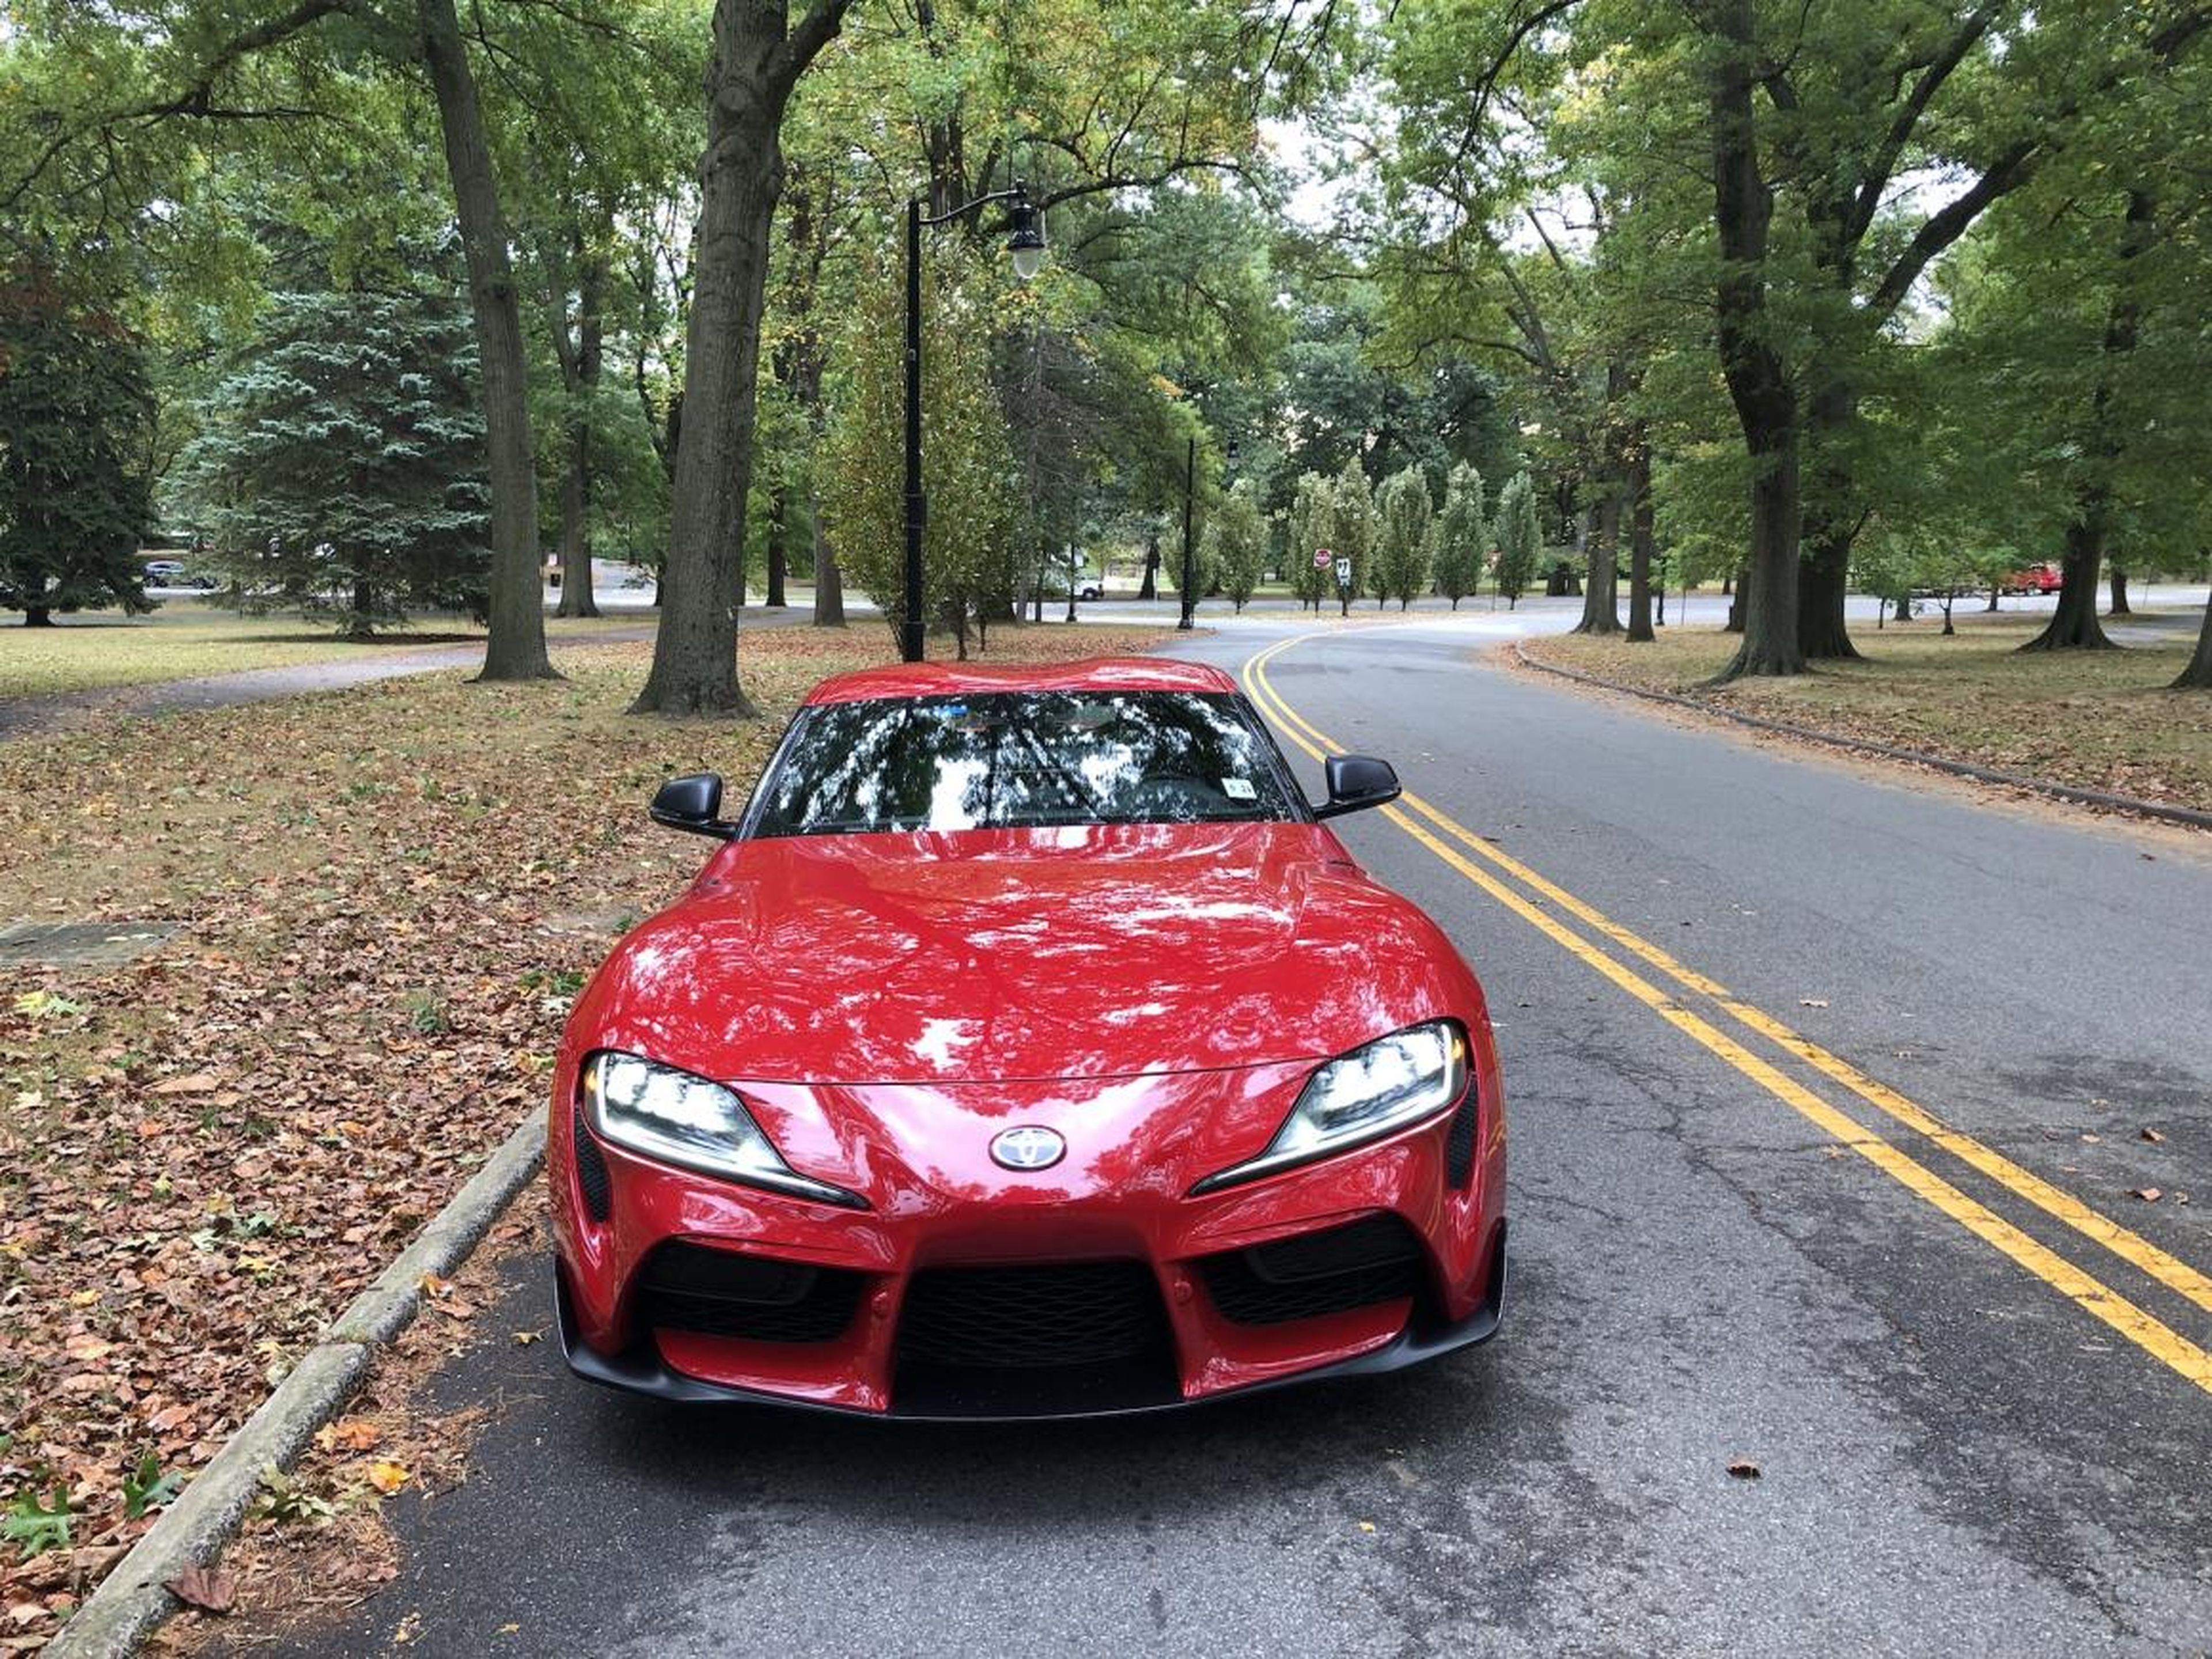 The pre-Supra concepts boasted crisper lines and a more adventurous attitude, while the production car seems to be angling for .. well, let's just say a younger buyer.